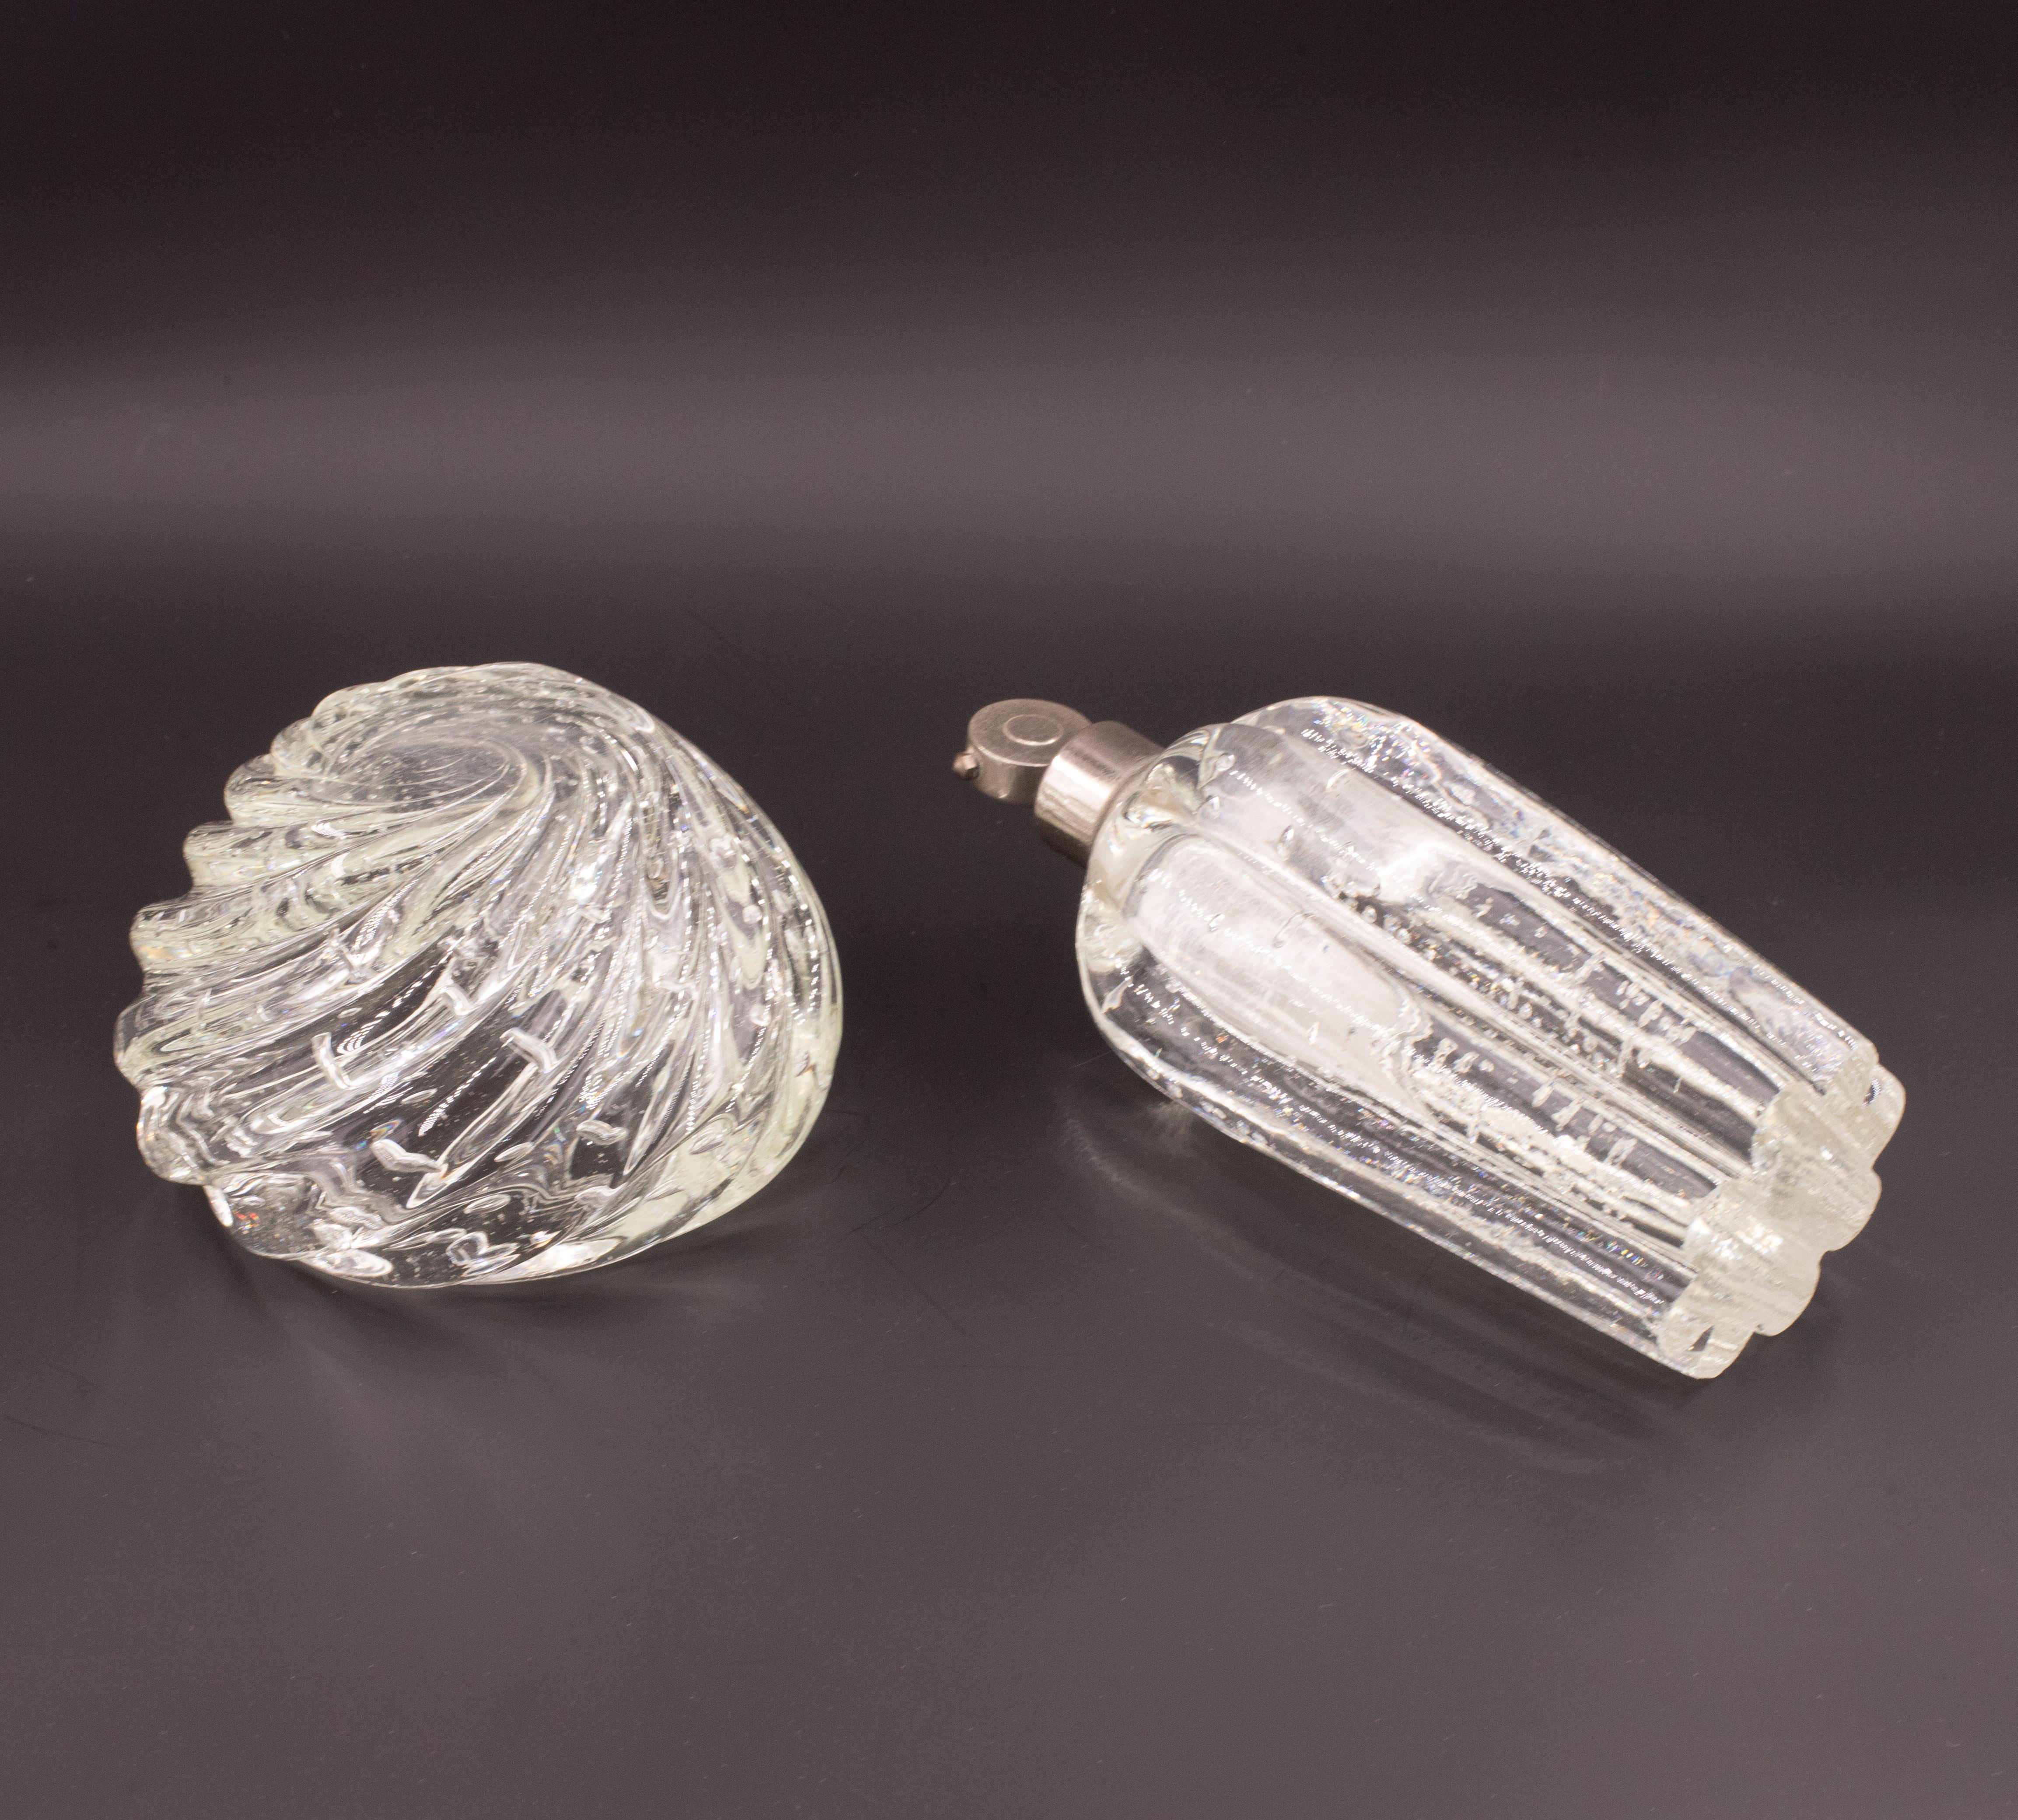 Set of 2 Bubbles Glass Vase by Barovier e Toso, 1950s For Sale 1